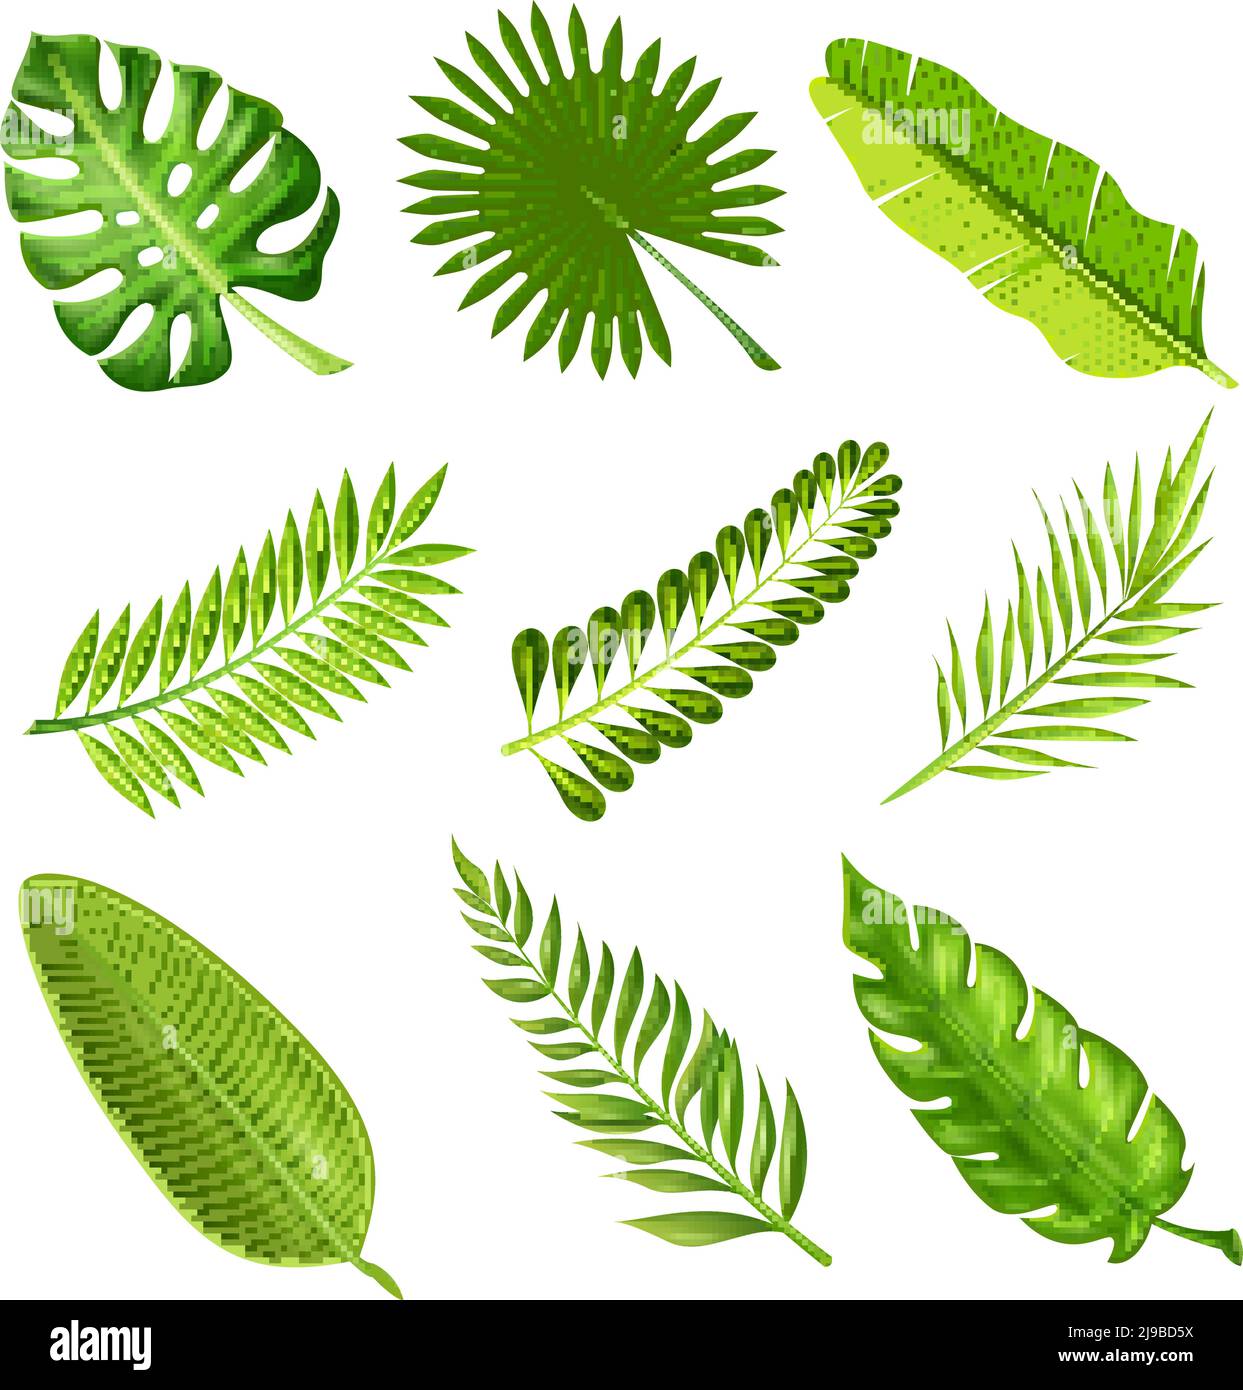 Collection of green decorative elements in realistic style showing different shapes of tropical palm tree branches on white background isolated vector Stock Vector